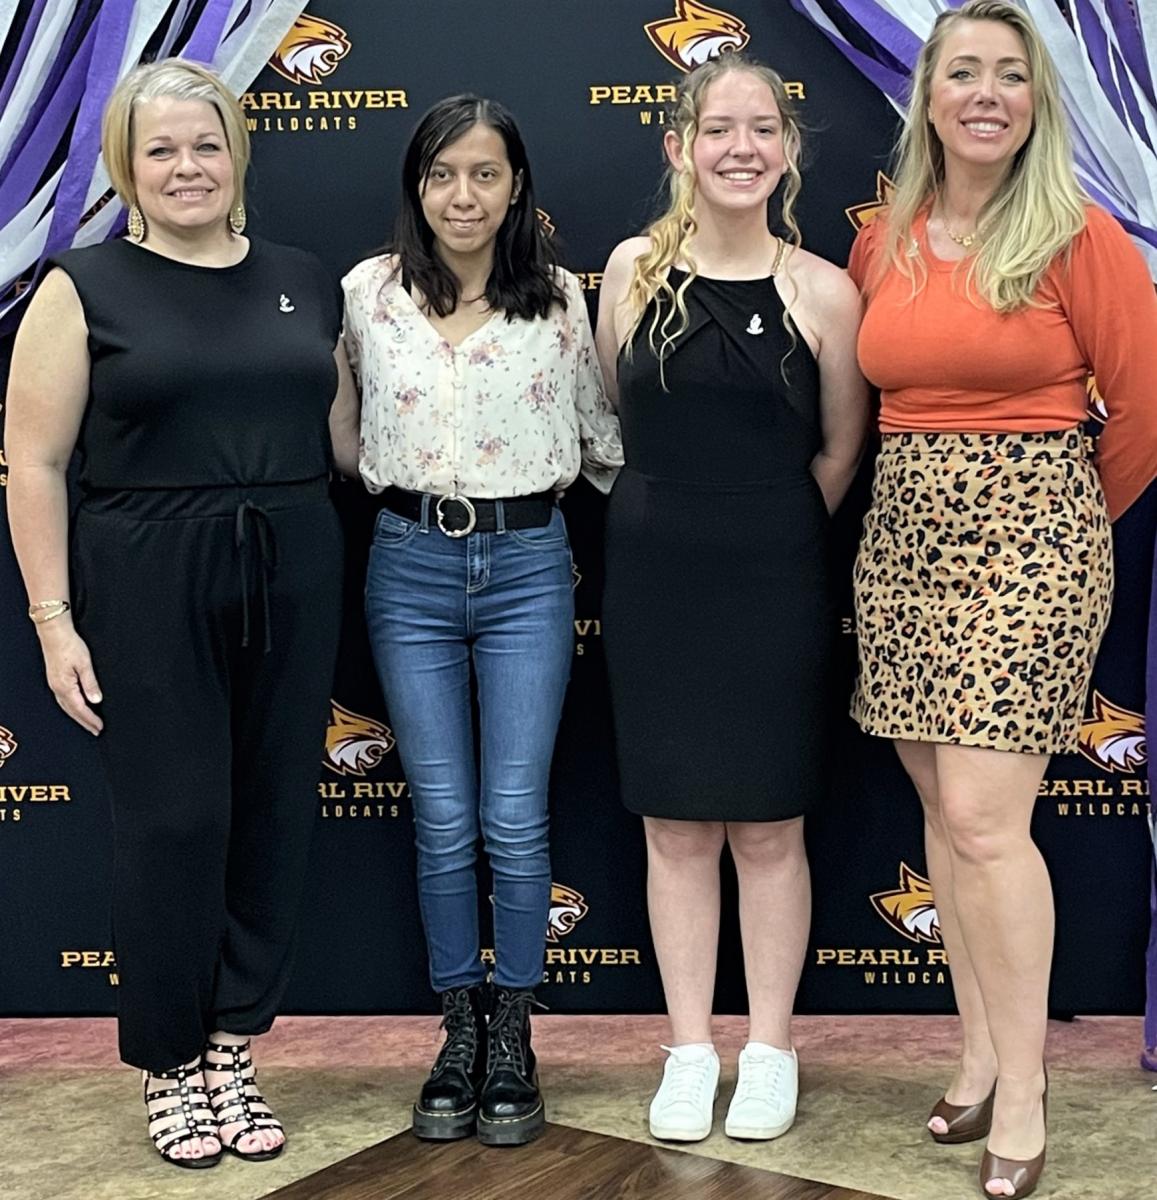 National Technical Honor Society Officers at Spring 2022 induction